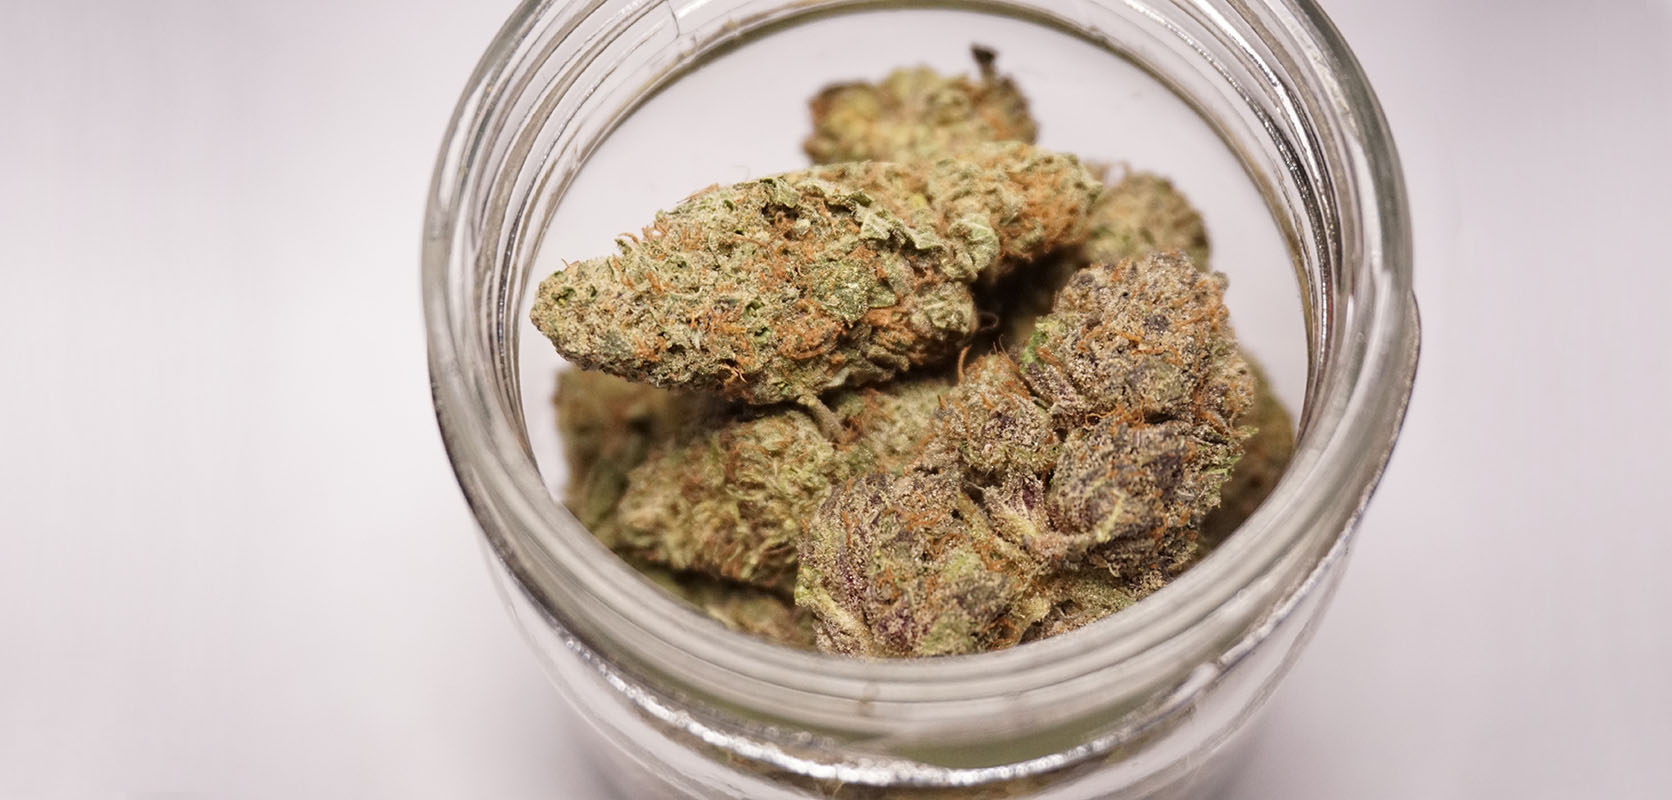 Budget buds large weed buds in a glass jar. buy online weeds cannabis canada. buy weed vapes canada.